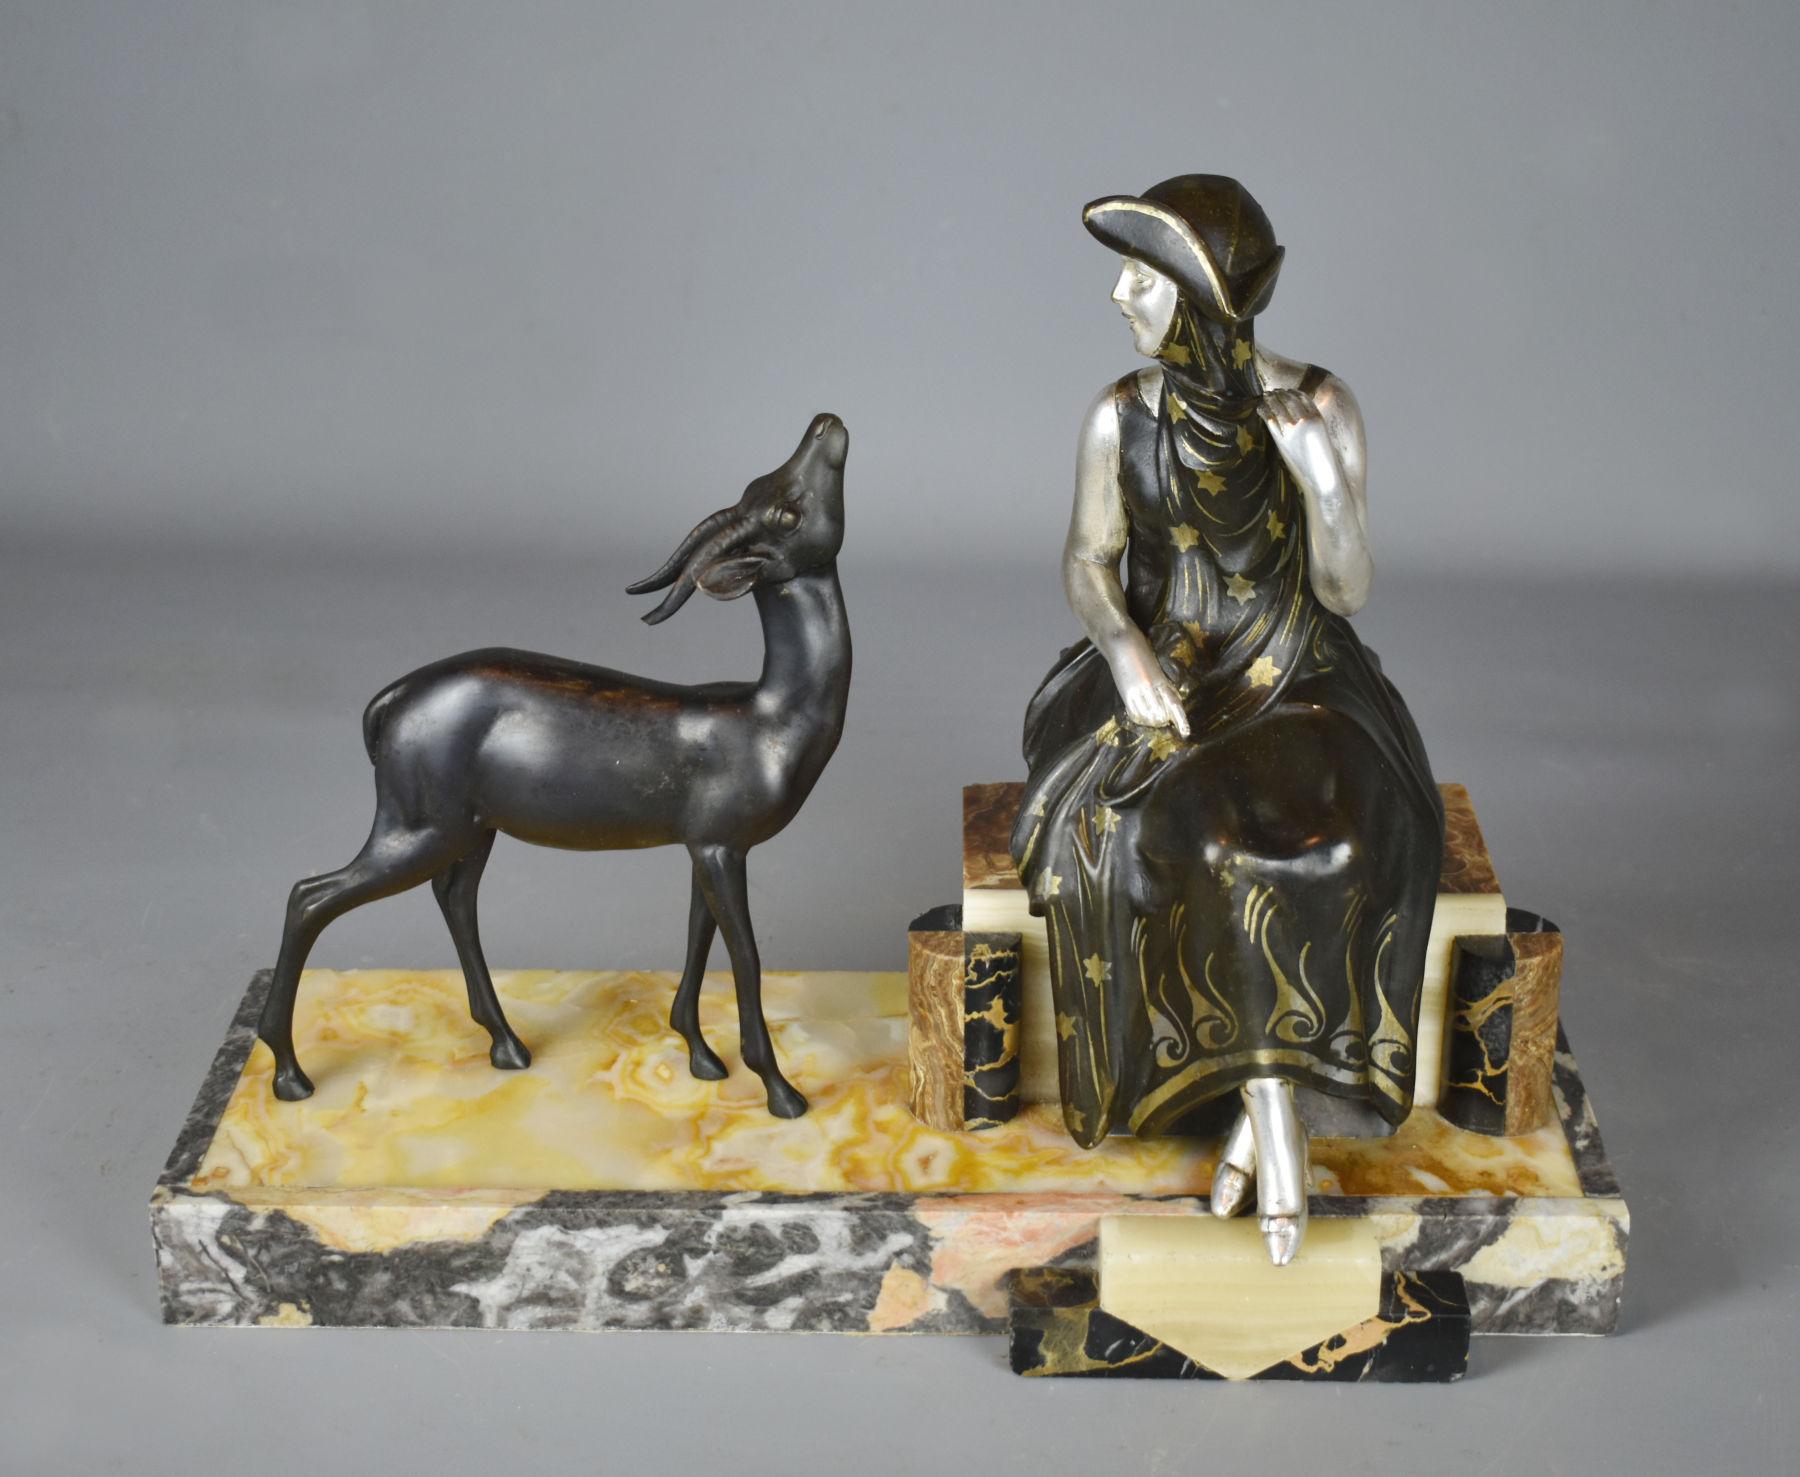 French Art Deco sculpture of lady and gazelle, 1930

A delightful original figural group depicting a young lady and a gazelle. They are both cast in spelter and cold painted. The lady is in gilt silver with a hand painted dress and the gazelle in